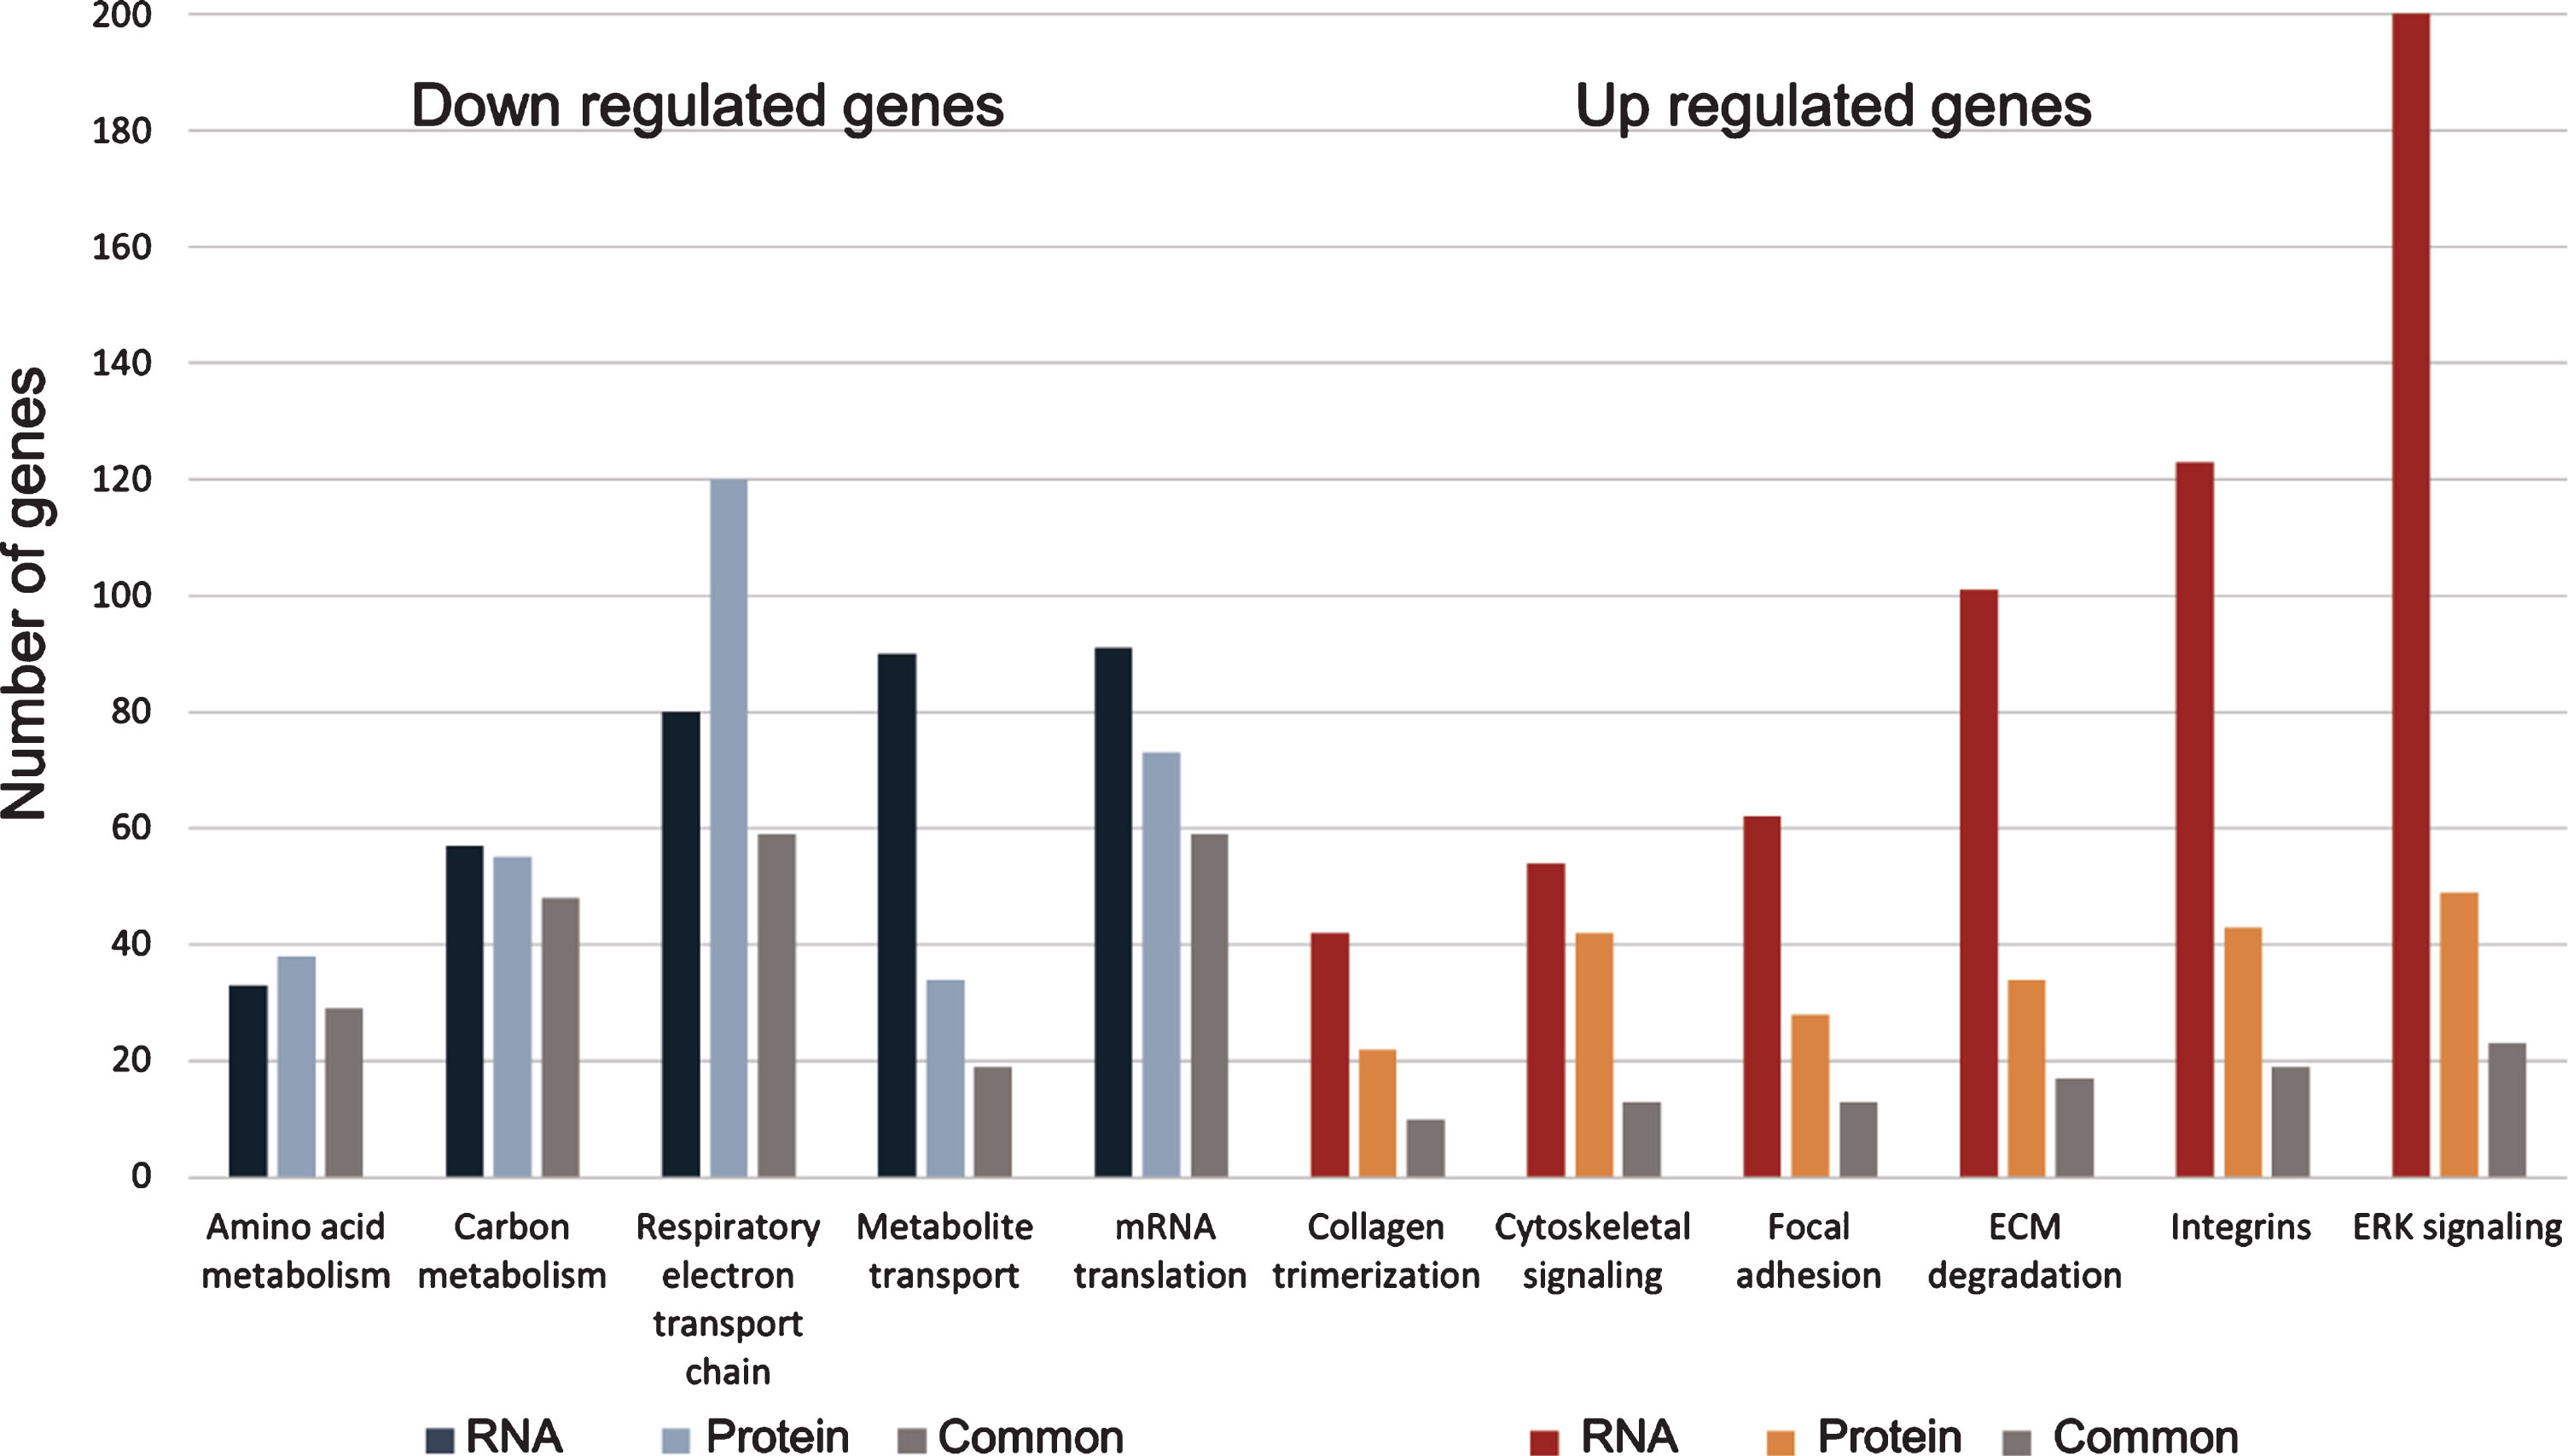 RNA and protein of sick phenotype kidneys share dysregulated pathways. Down-regulated genes in RNA and protein are colored in blue and light-blue, respectively. Common genes in grey. Up-regulated genes in RNA and protein are colored in red and orange, respectively. Common genes in grey.